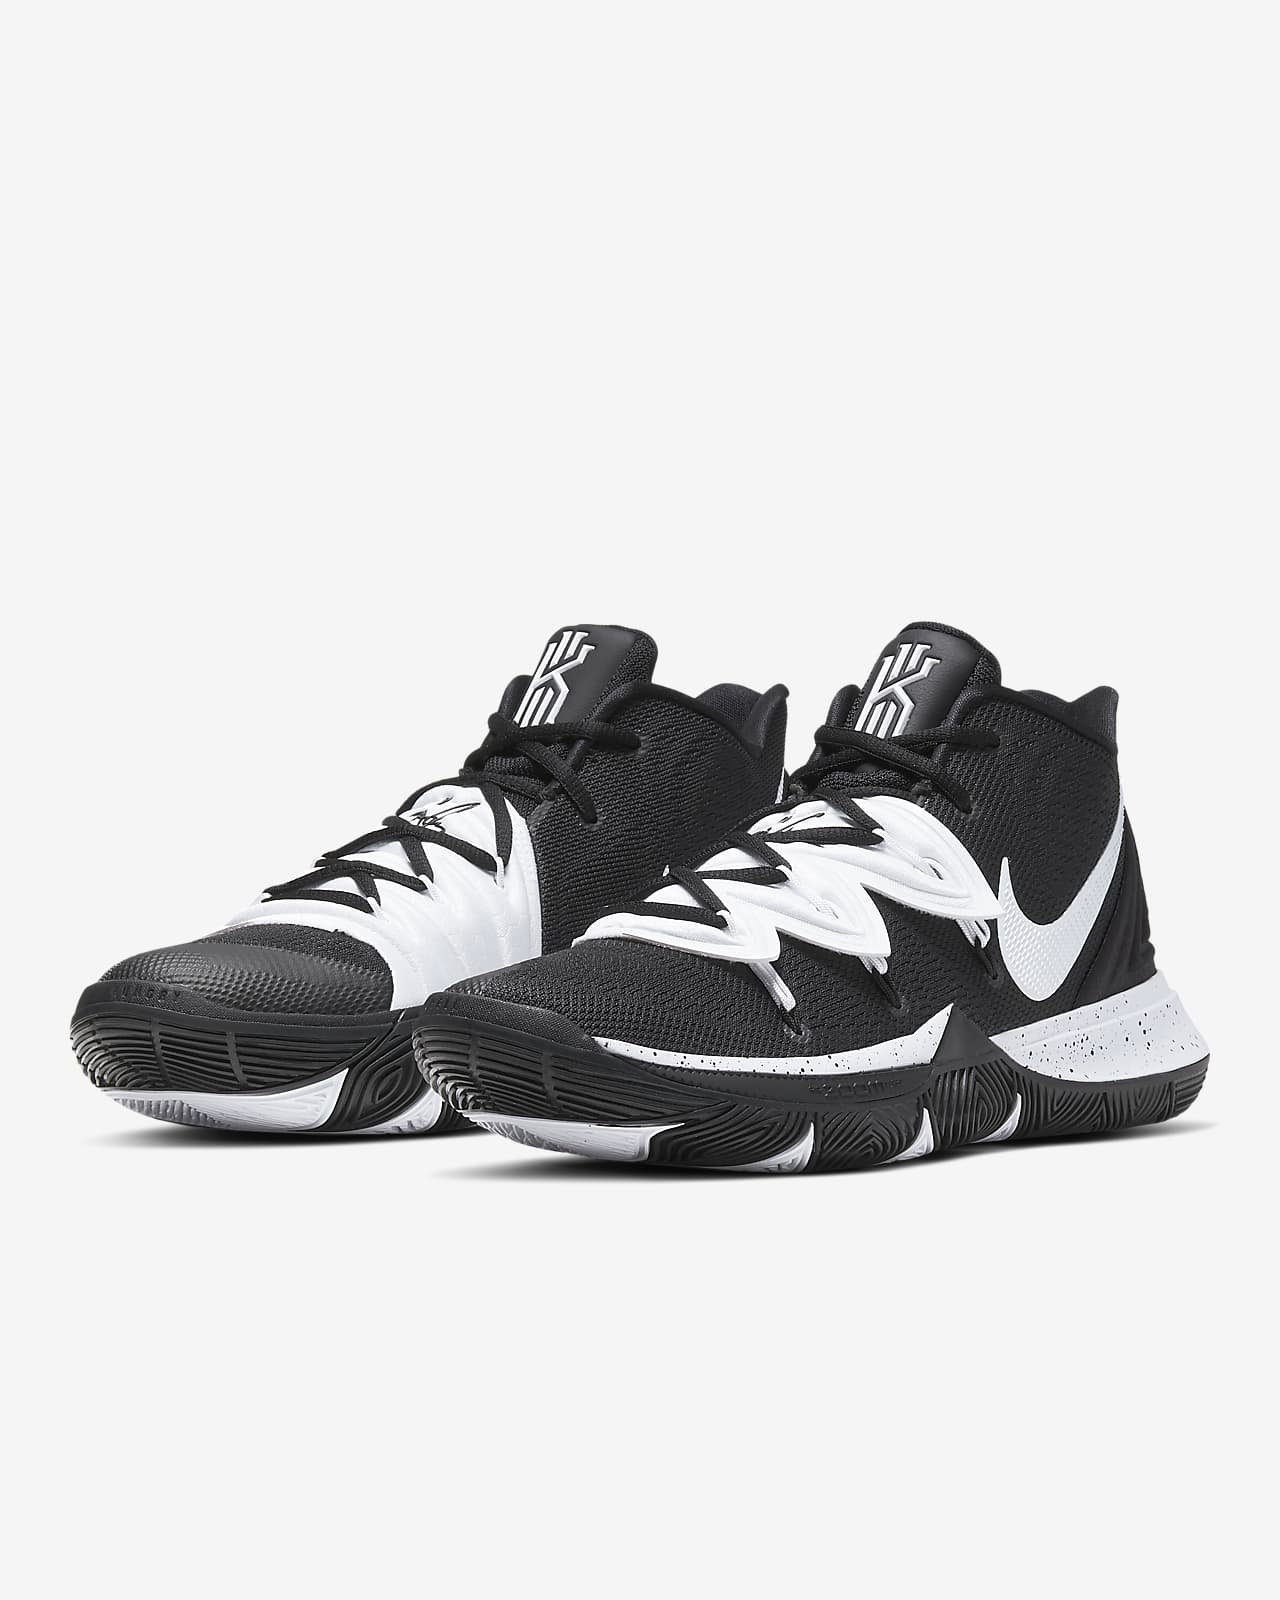 Nike Kyrie 5 Black Red Men 's Basketball Shoes Irving Sneakers